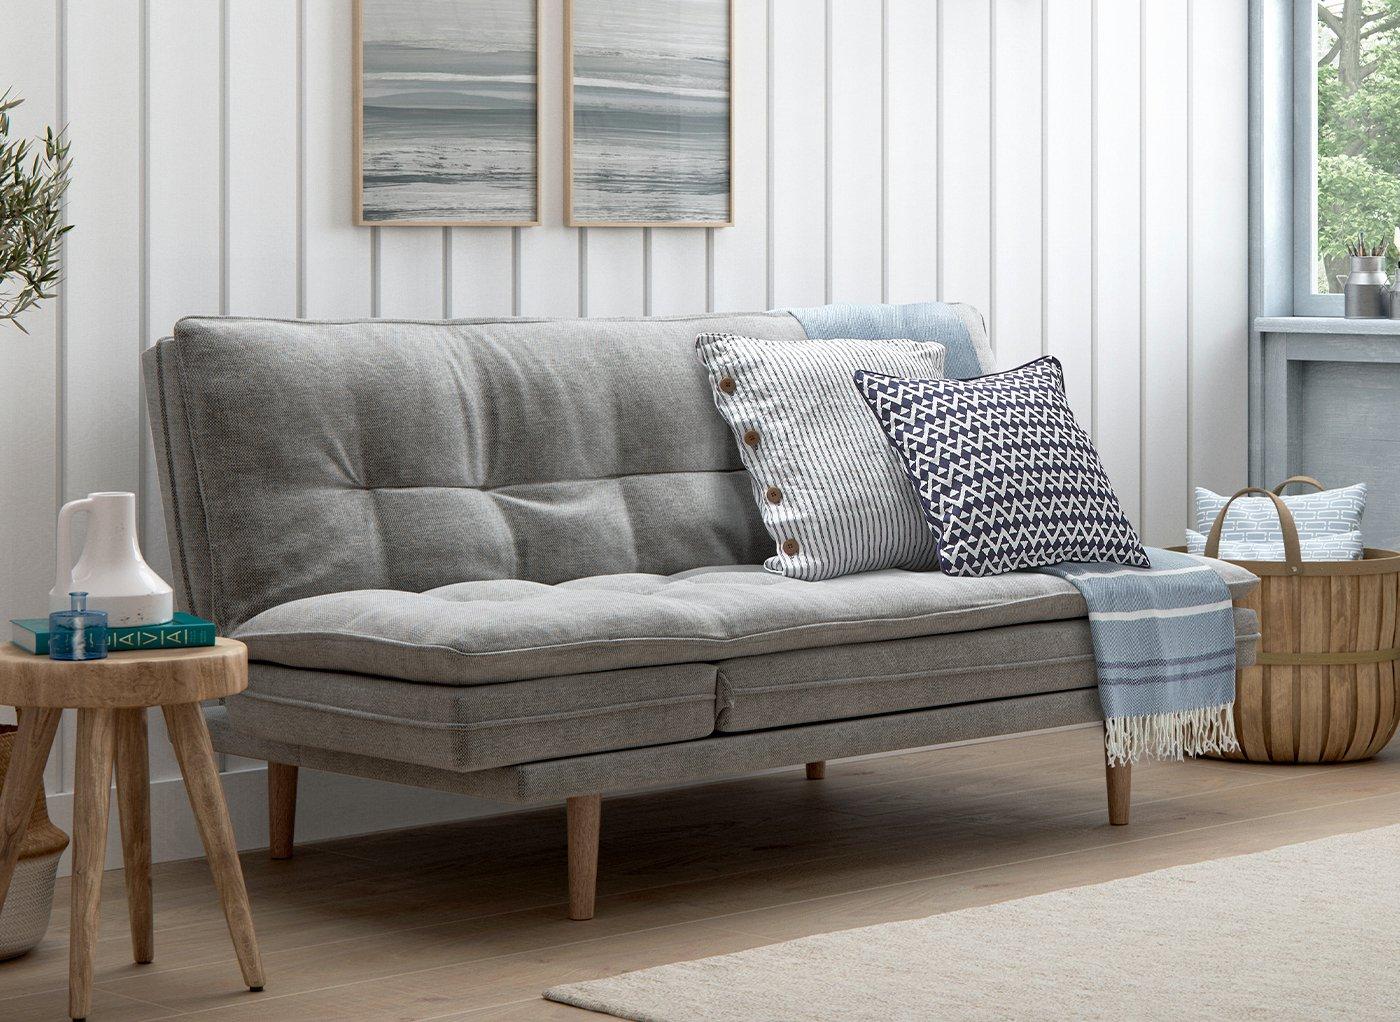 clic clac sofa bed with arms